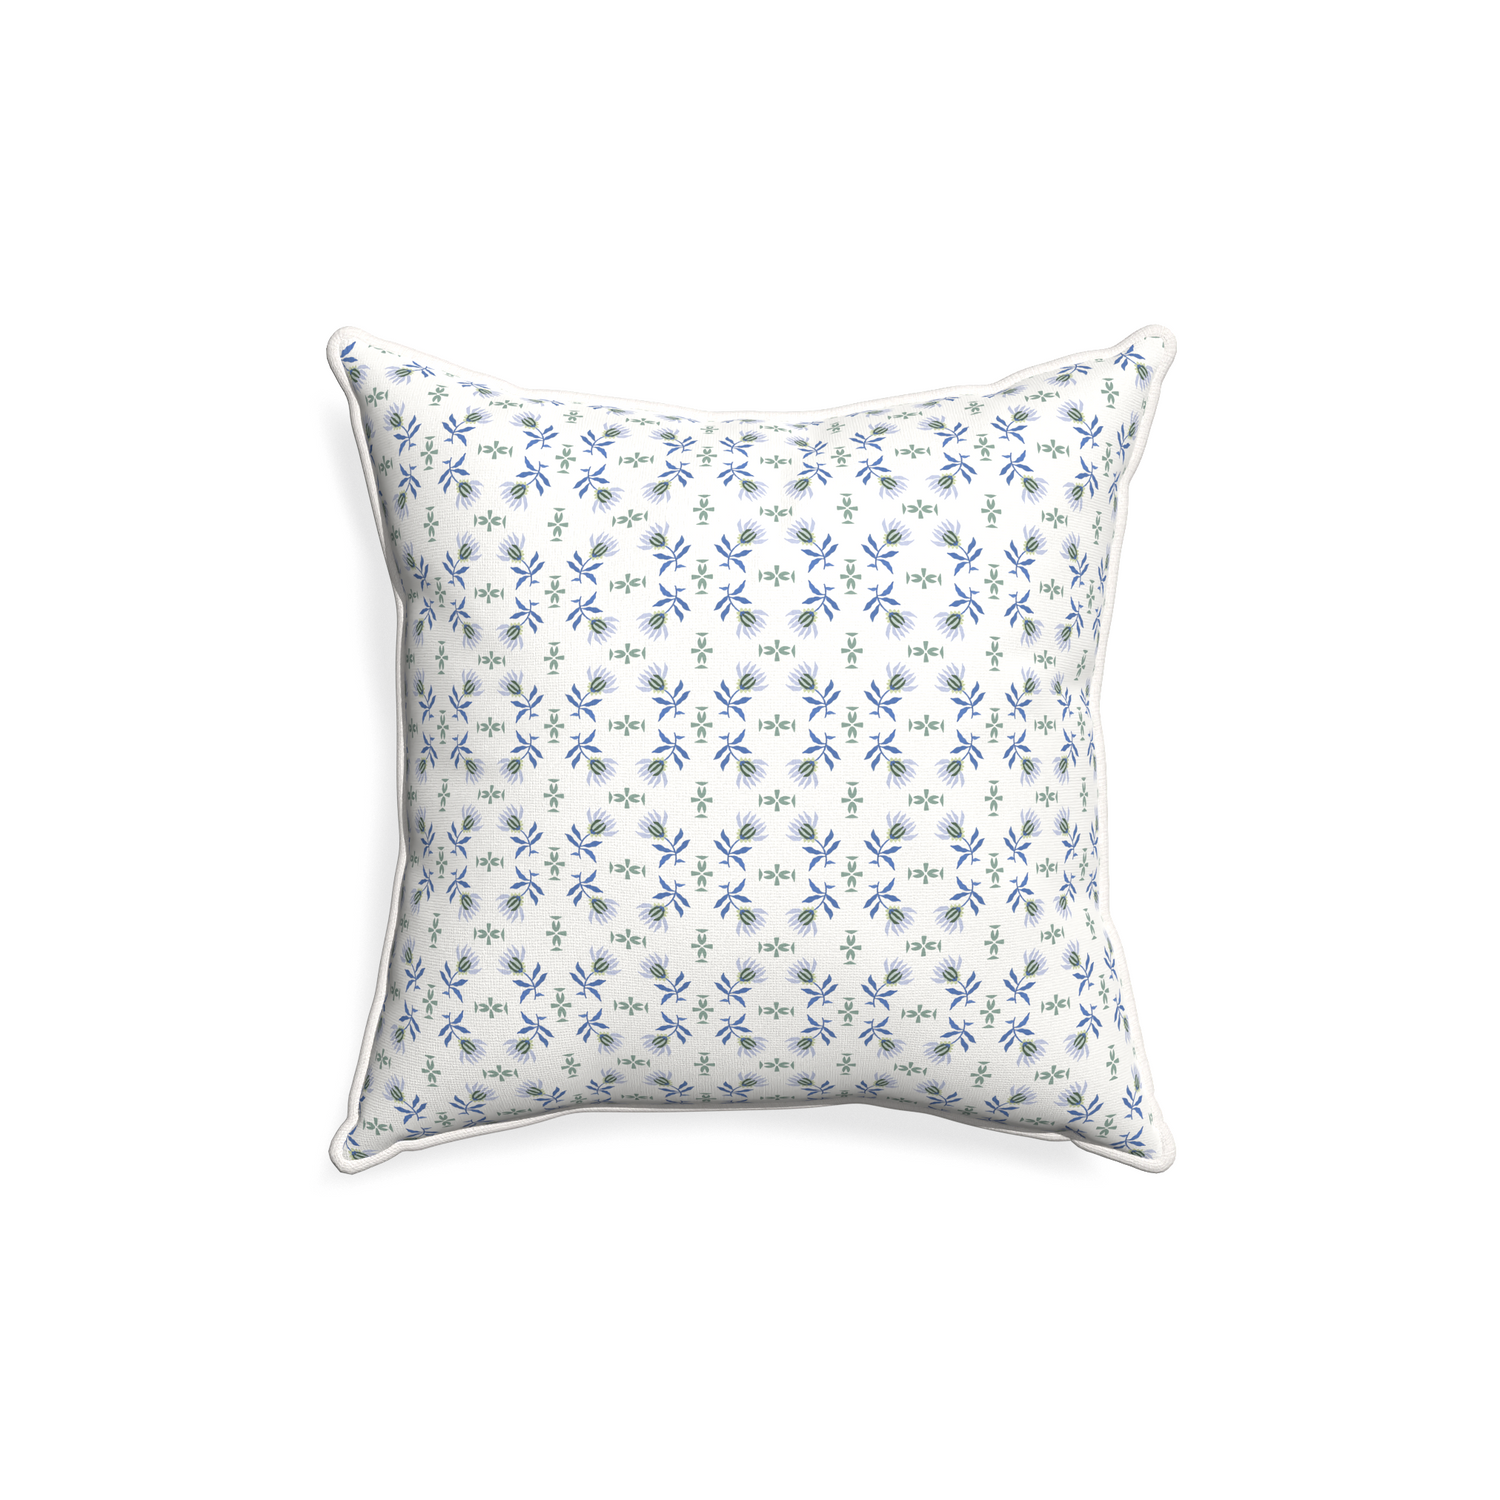 18-square lee custom pillow with snow piping on white background